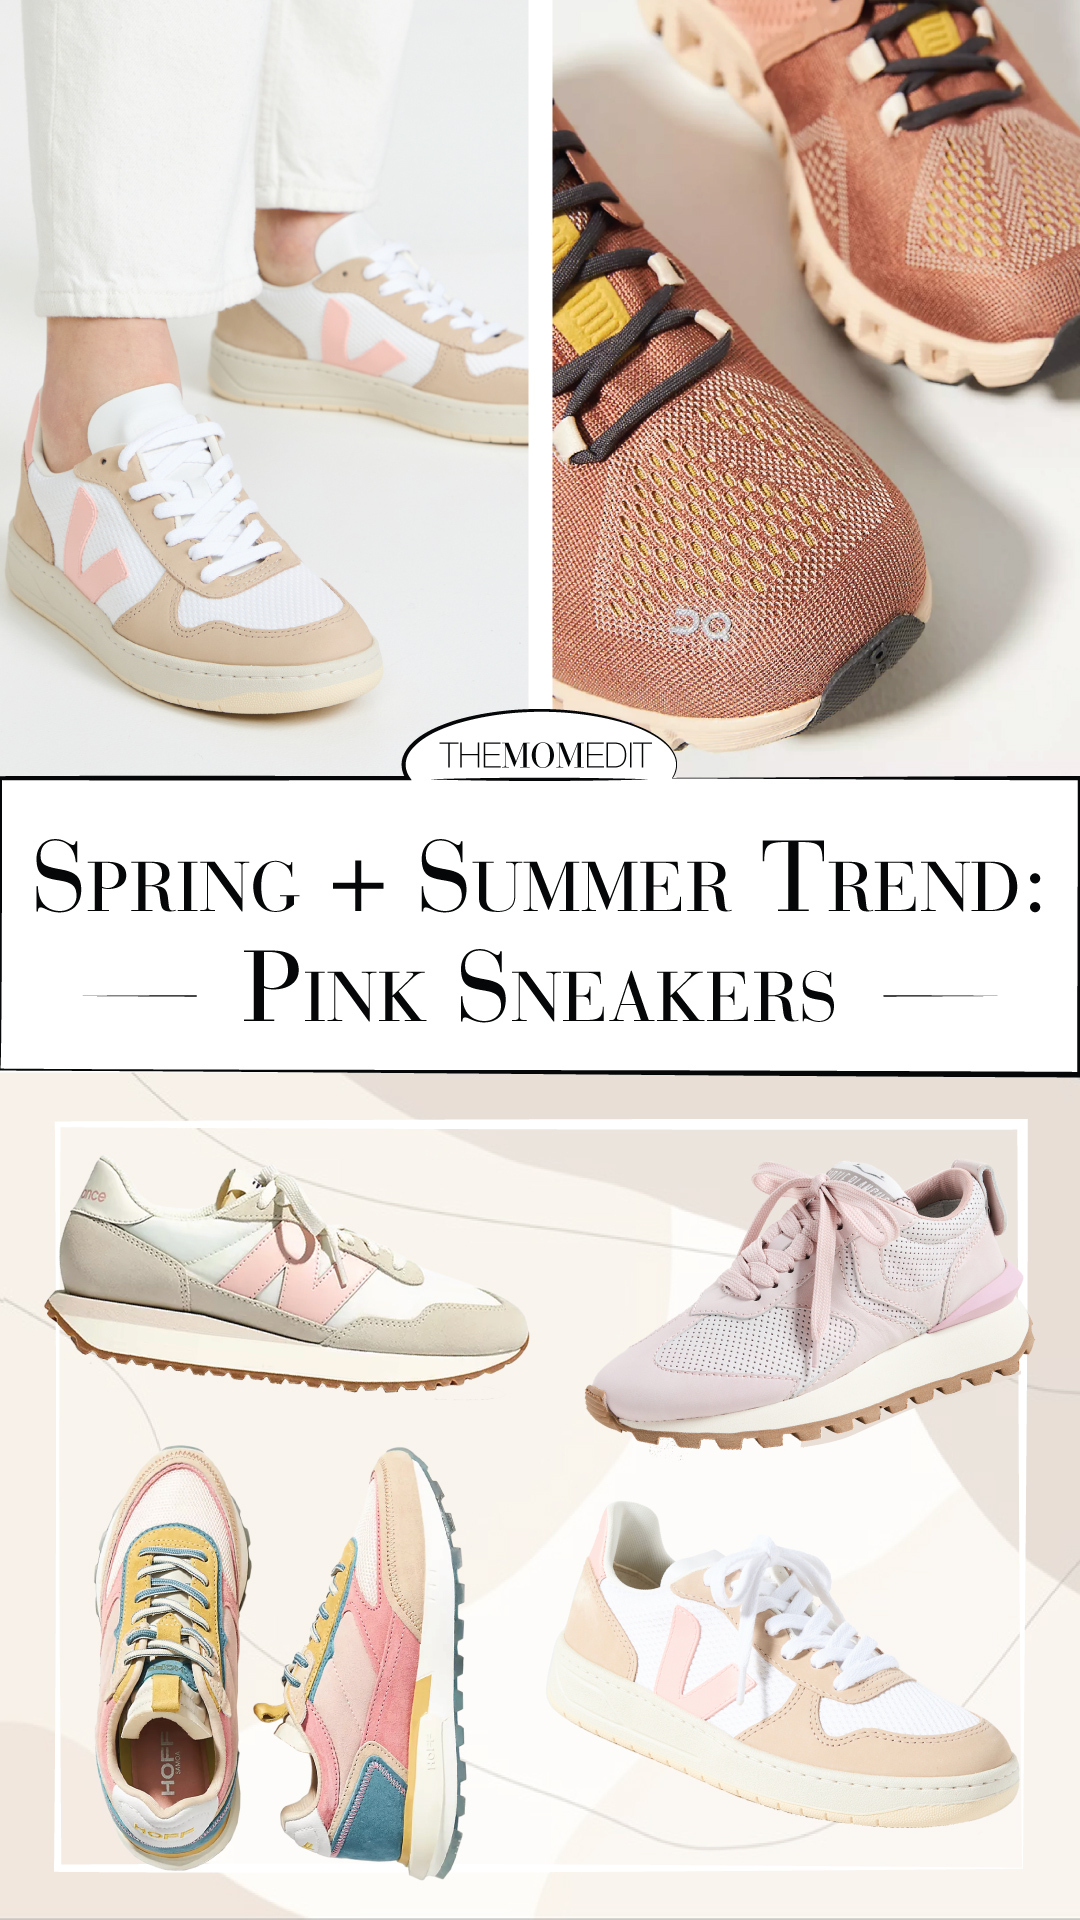 Whether you're going for all pink sneakers or tennis shoes with just a hint of color, these pairs from Veja, Nike, Sorel, On & more are right on-trend this spring.